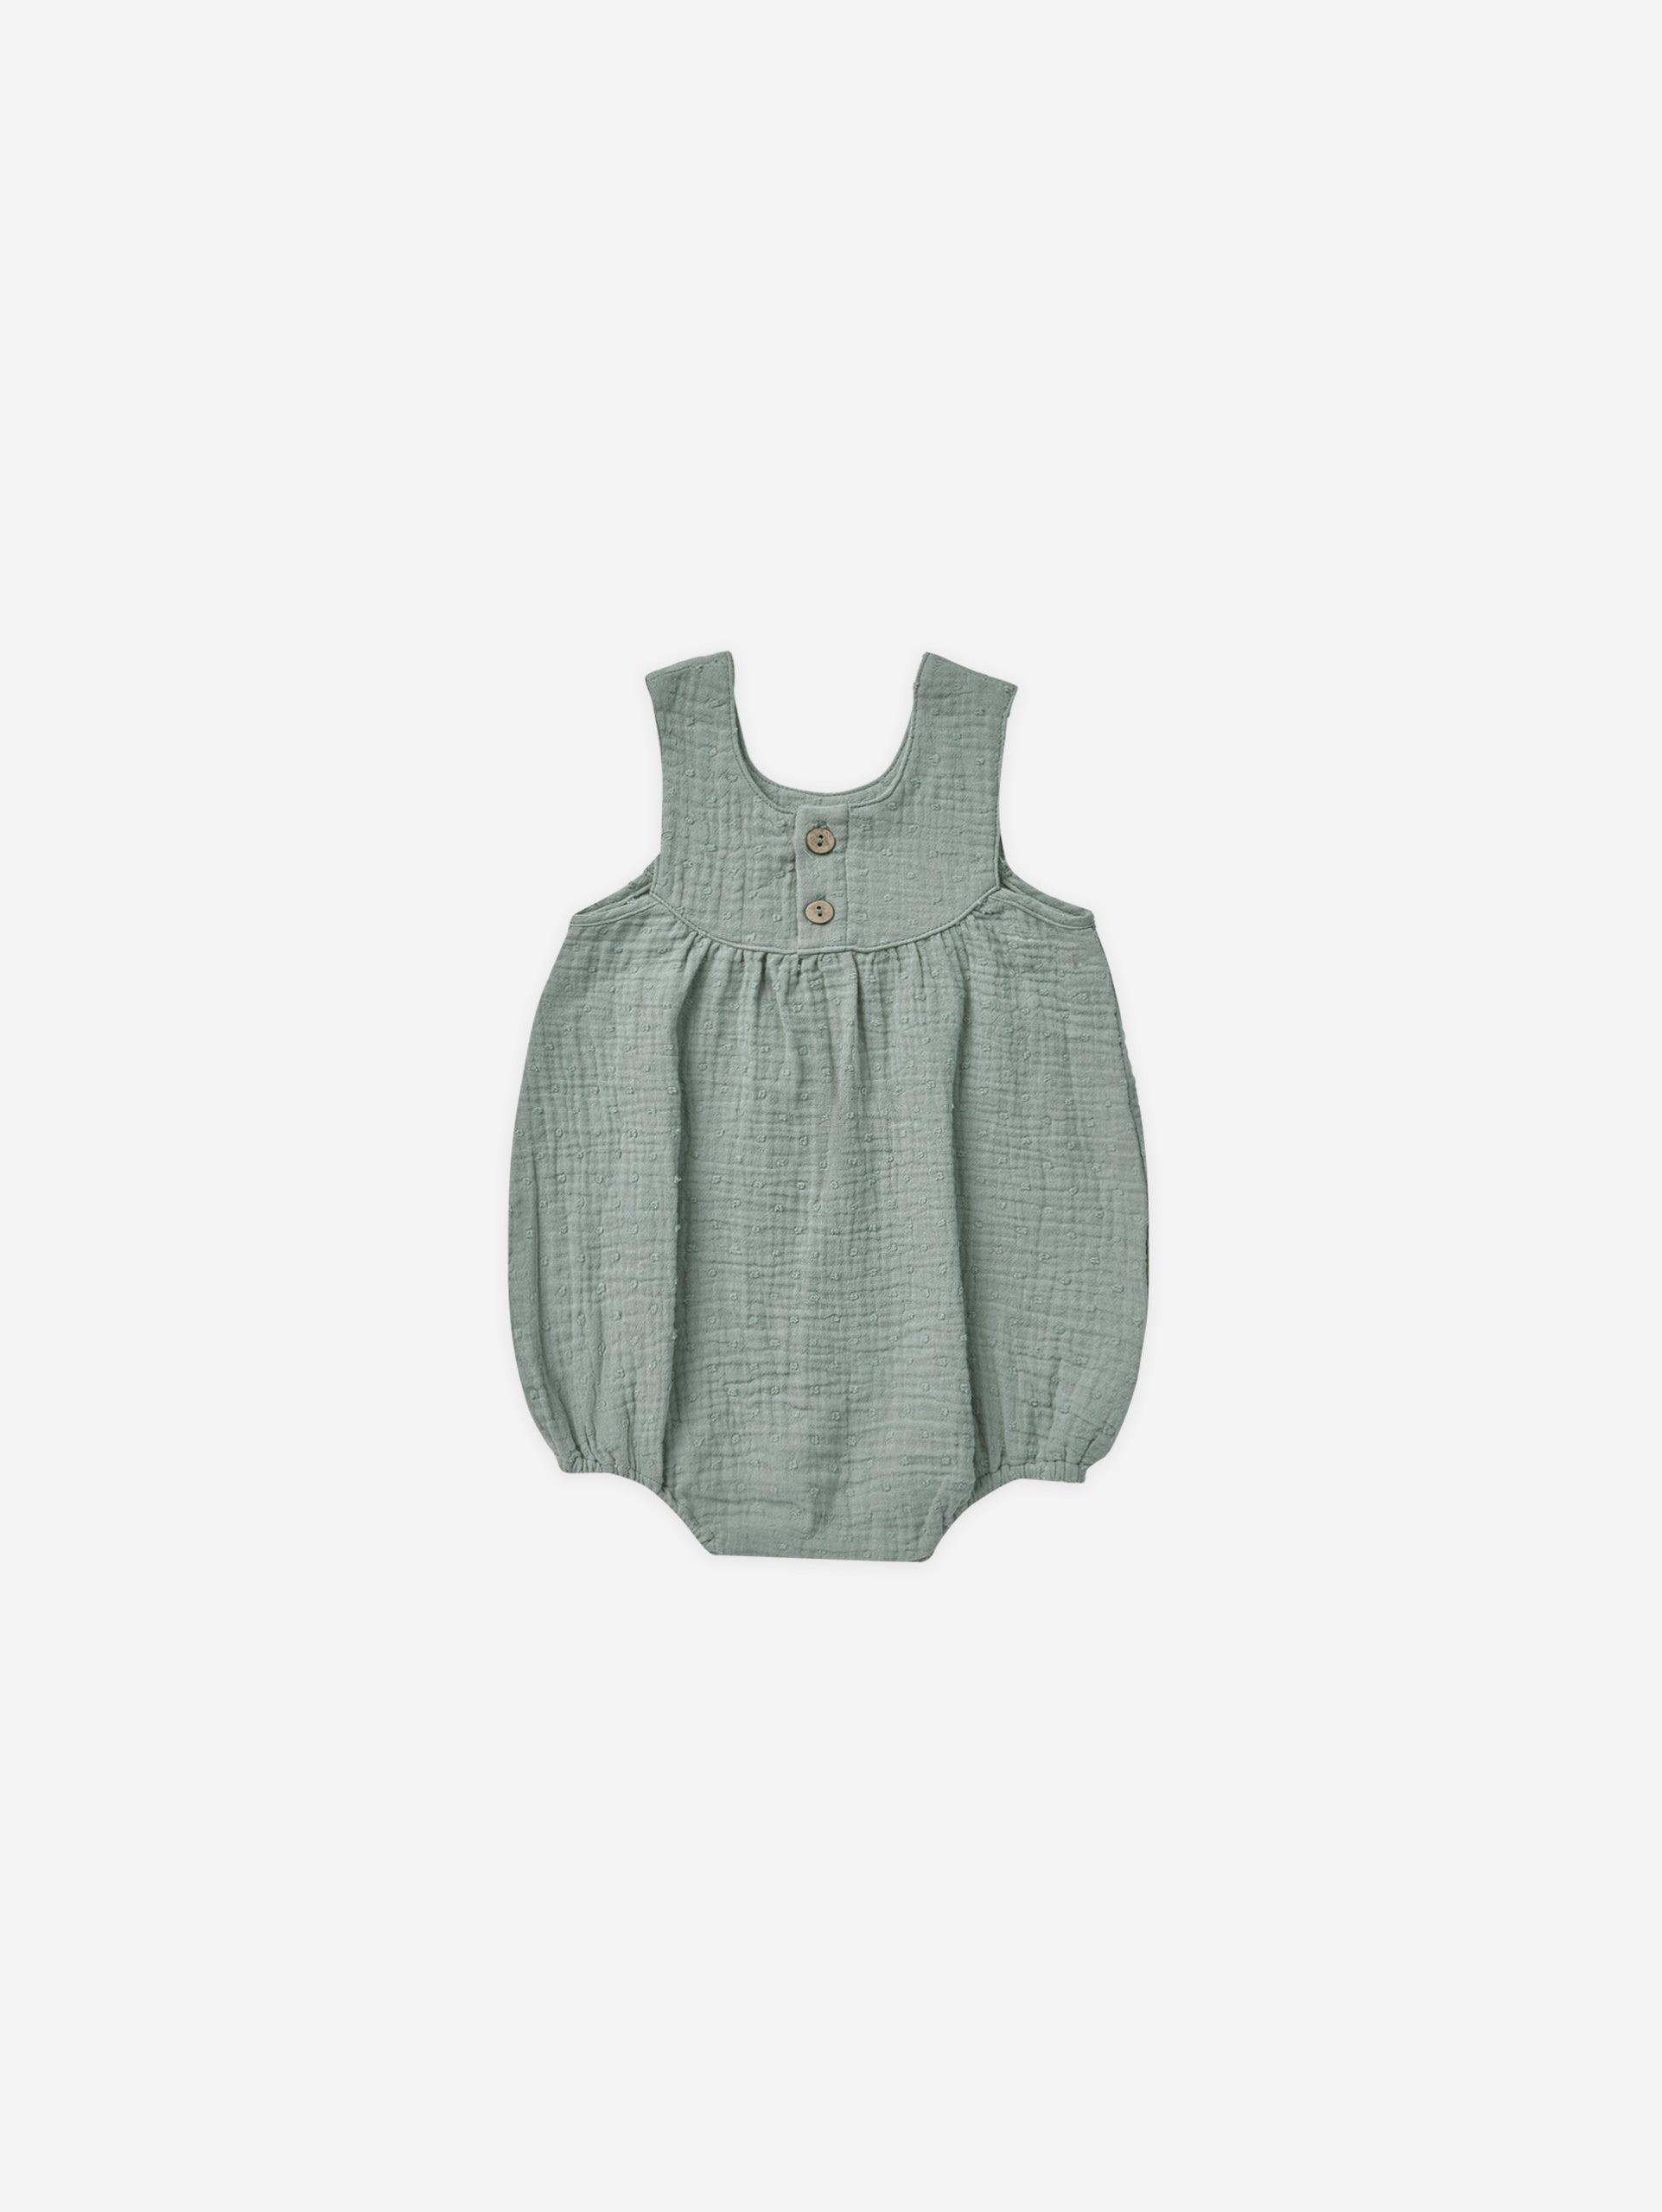 June Romper || Aqua - Rylee + Cru | Kids Clothes | Trendy Baby Clothes | Modern Infant Outfits |